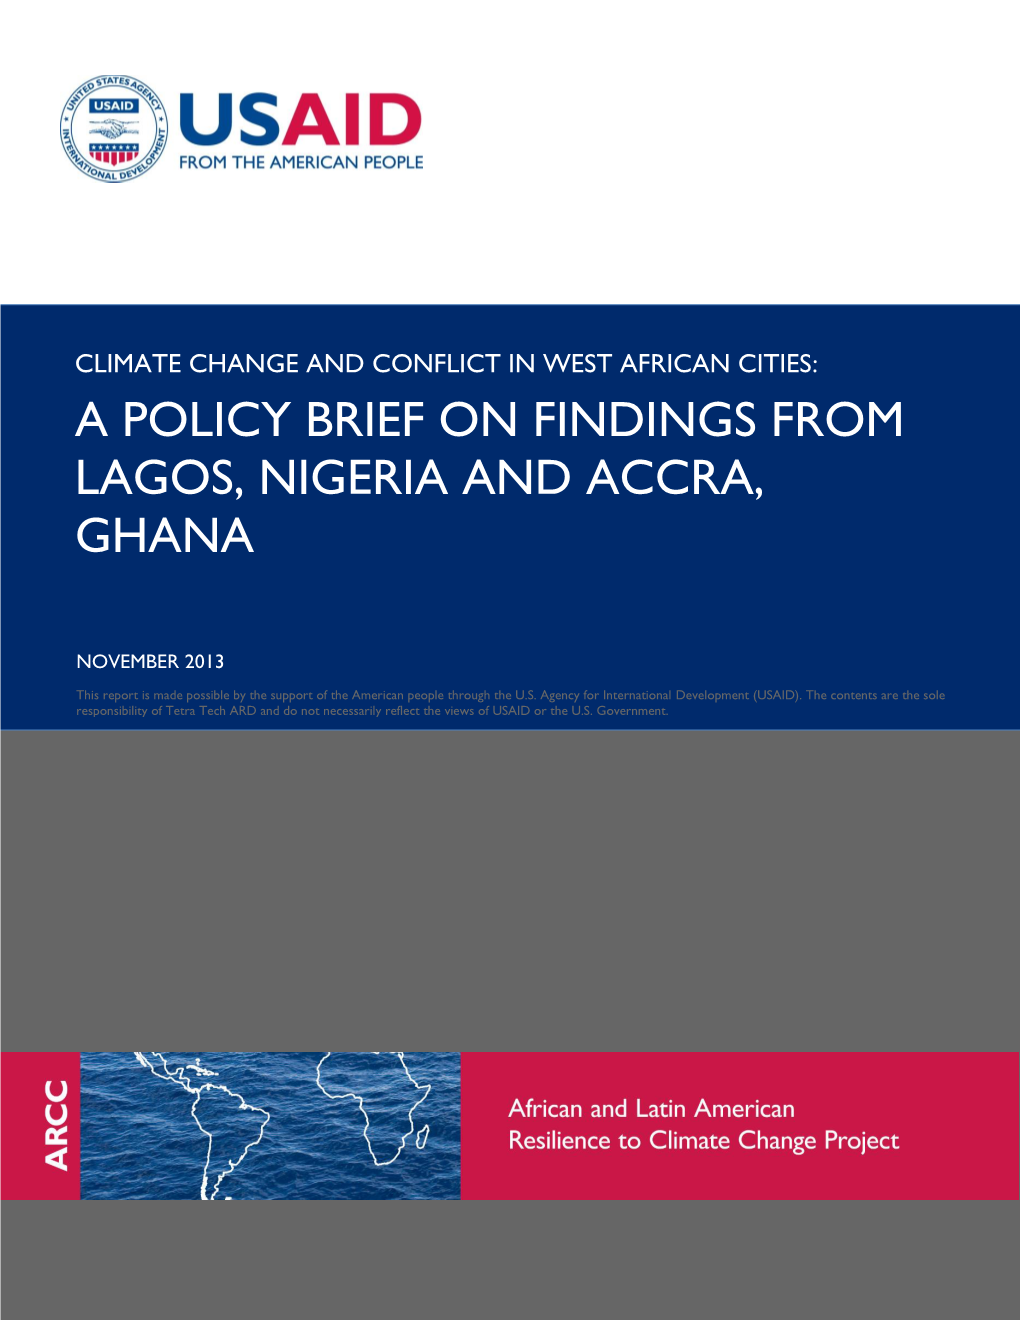 A Policy Brief on Findings from Lagos, Nigeria and Accra, Ghana